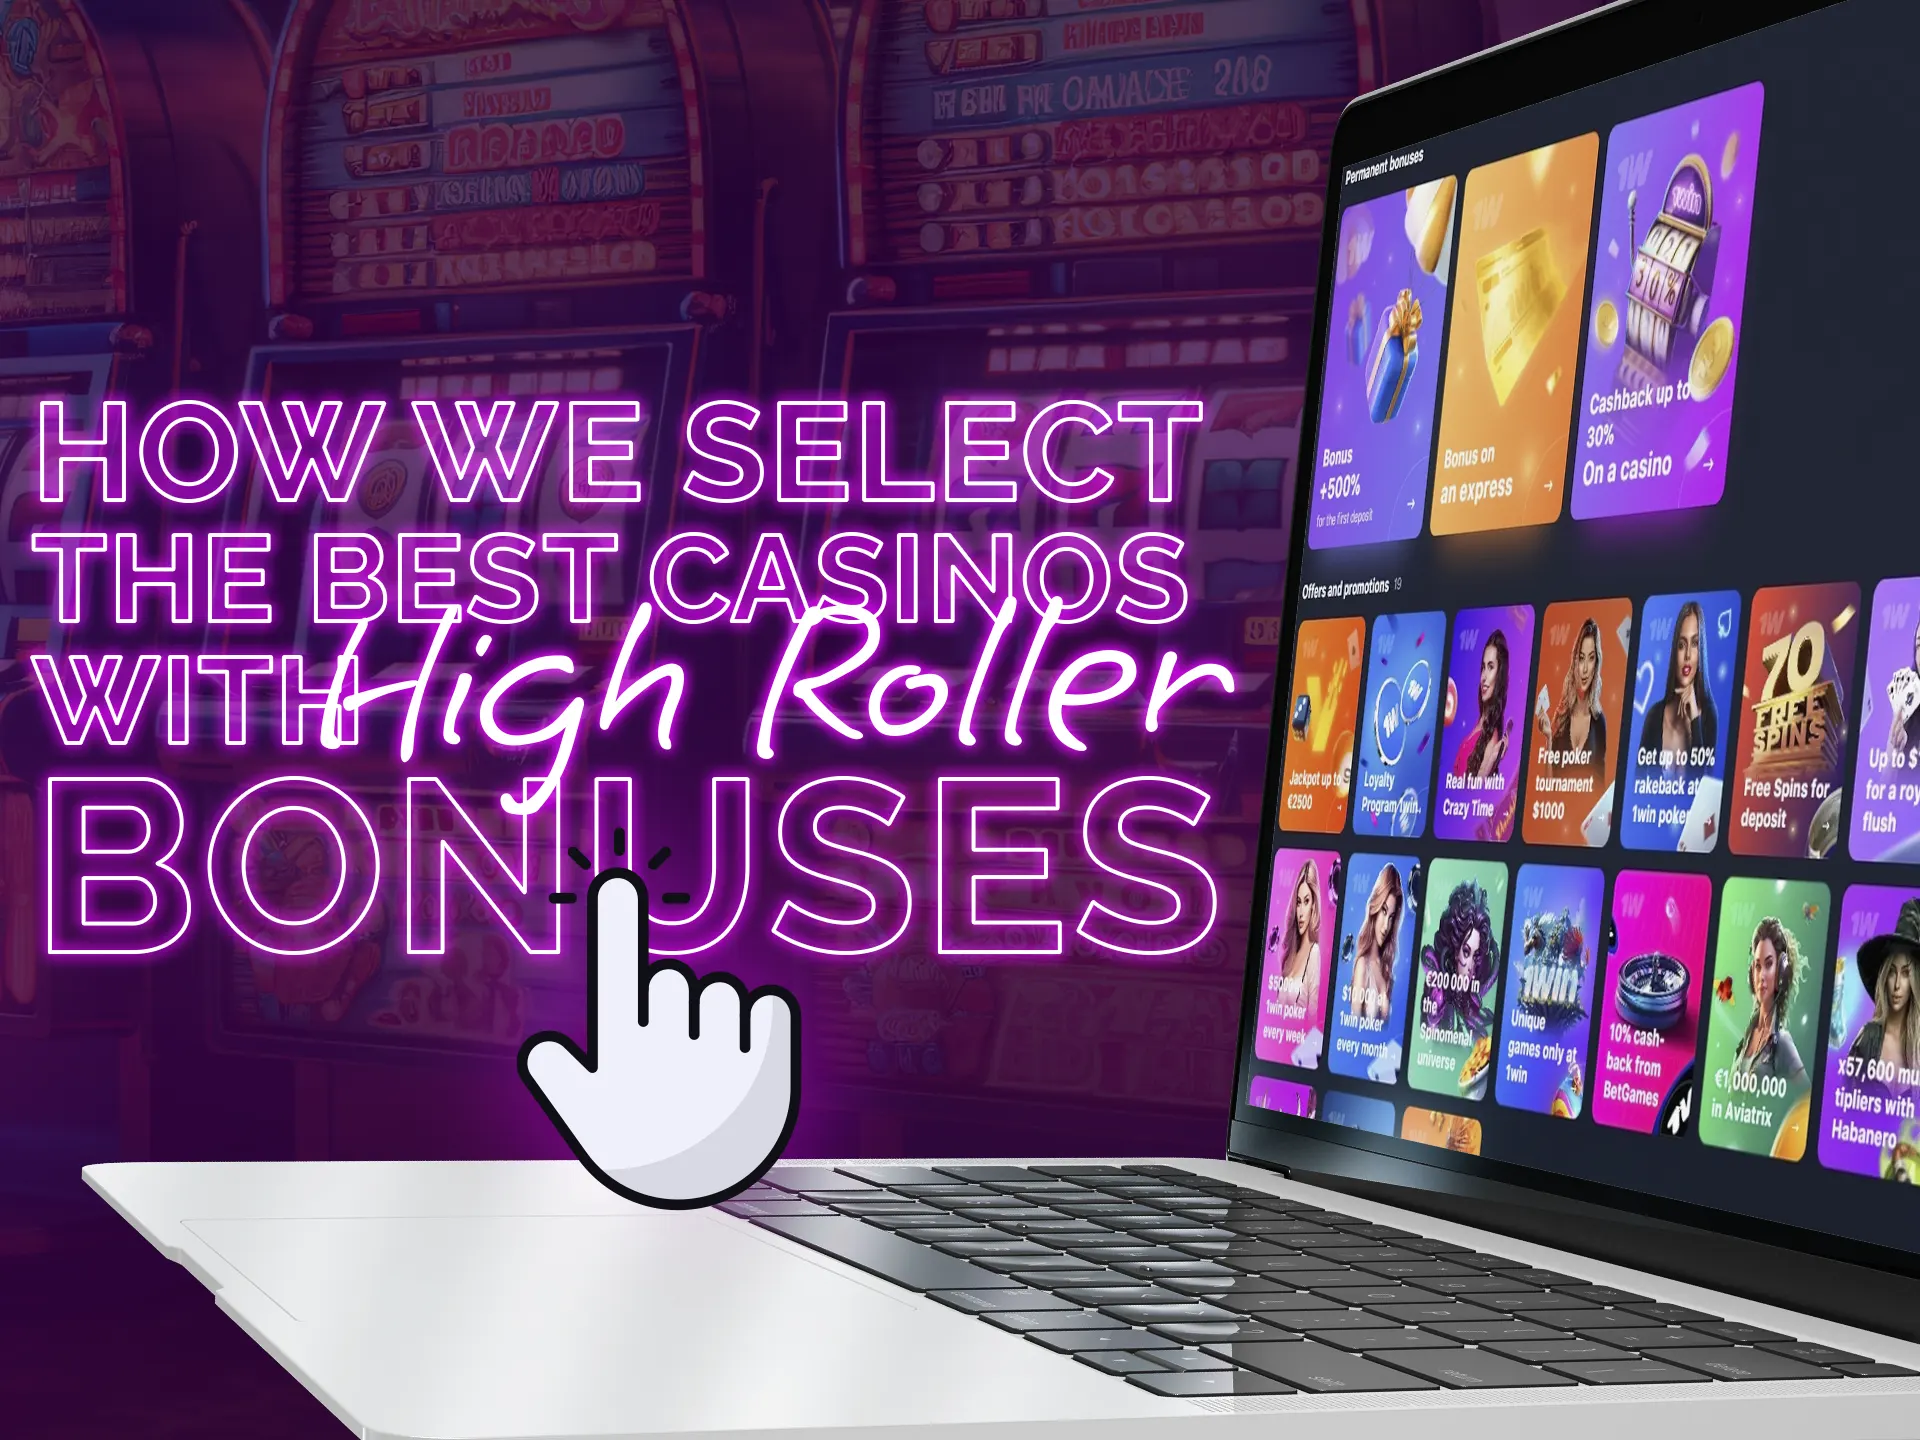 The way how we selecting best casinos with high-roller bonuses.